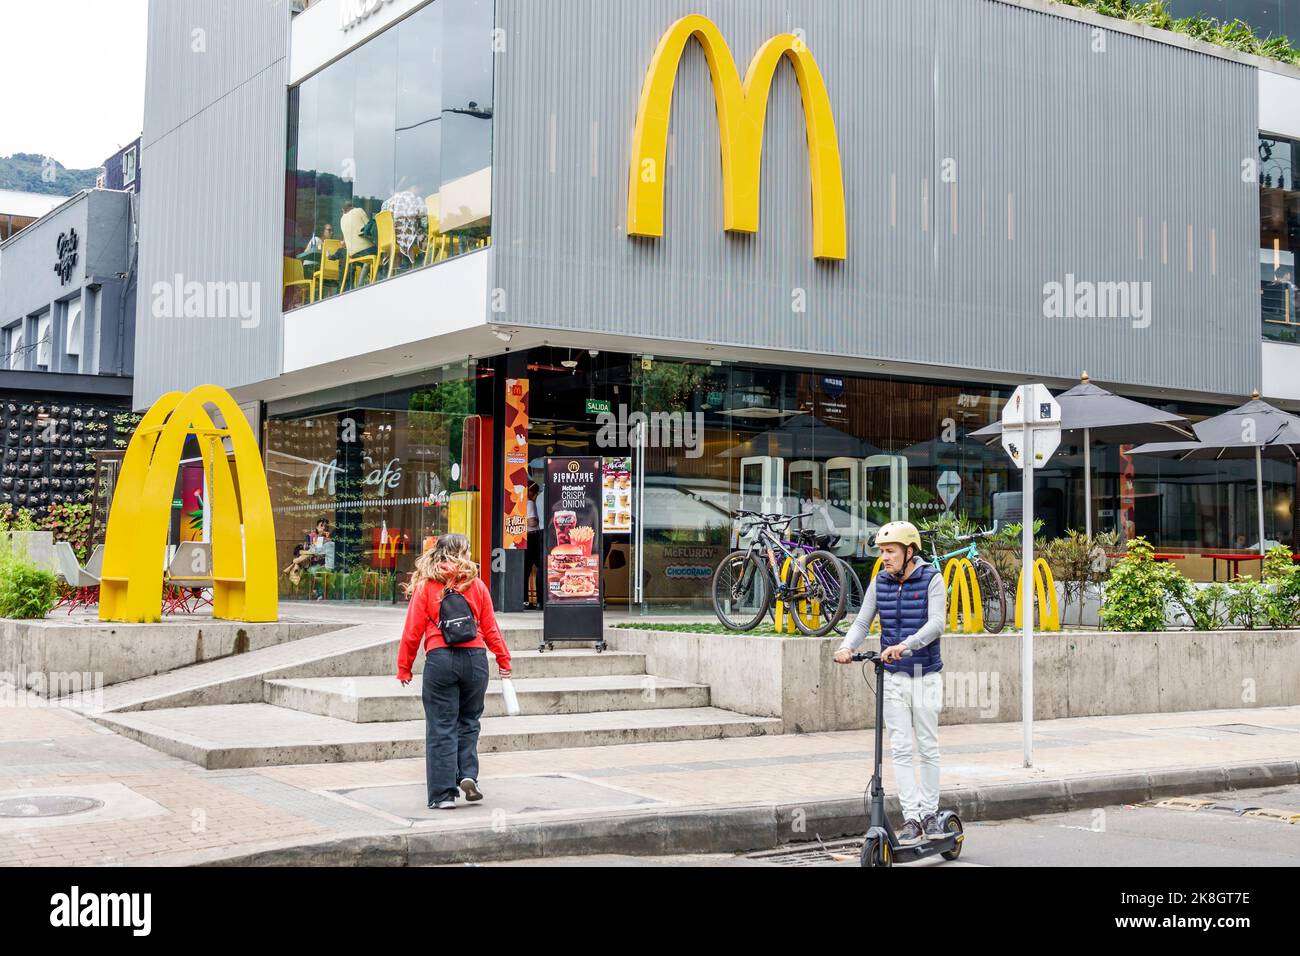 Bogota Colombia,El Chico McDonald's Parque 93,fast food restaurant restaurants dine dining eating out casual cafe cafes bistro bistros,golden arches l Stock Photo